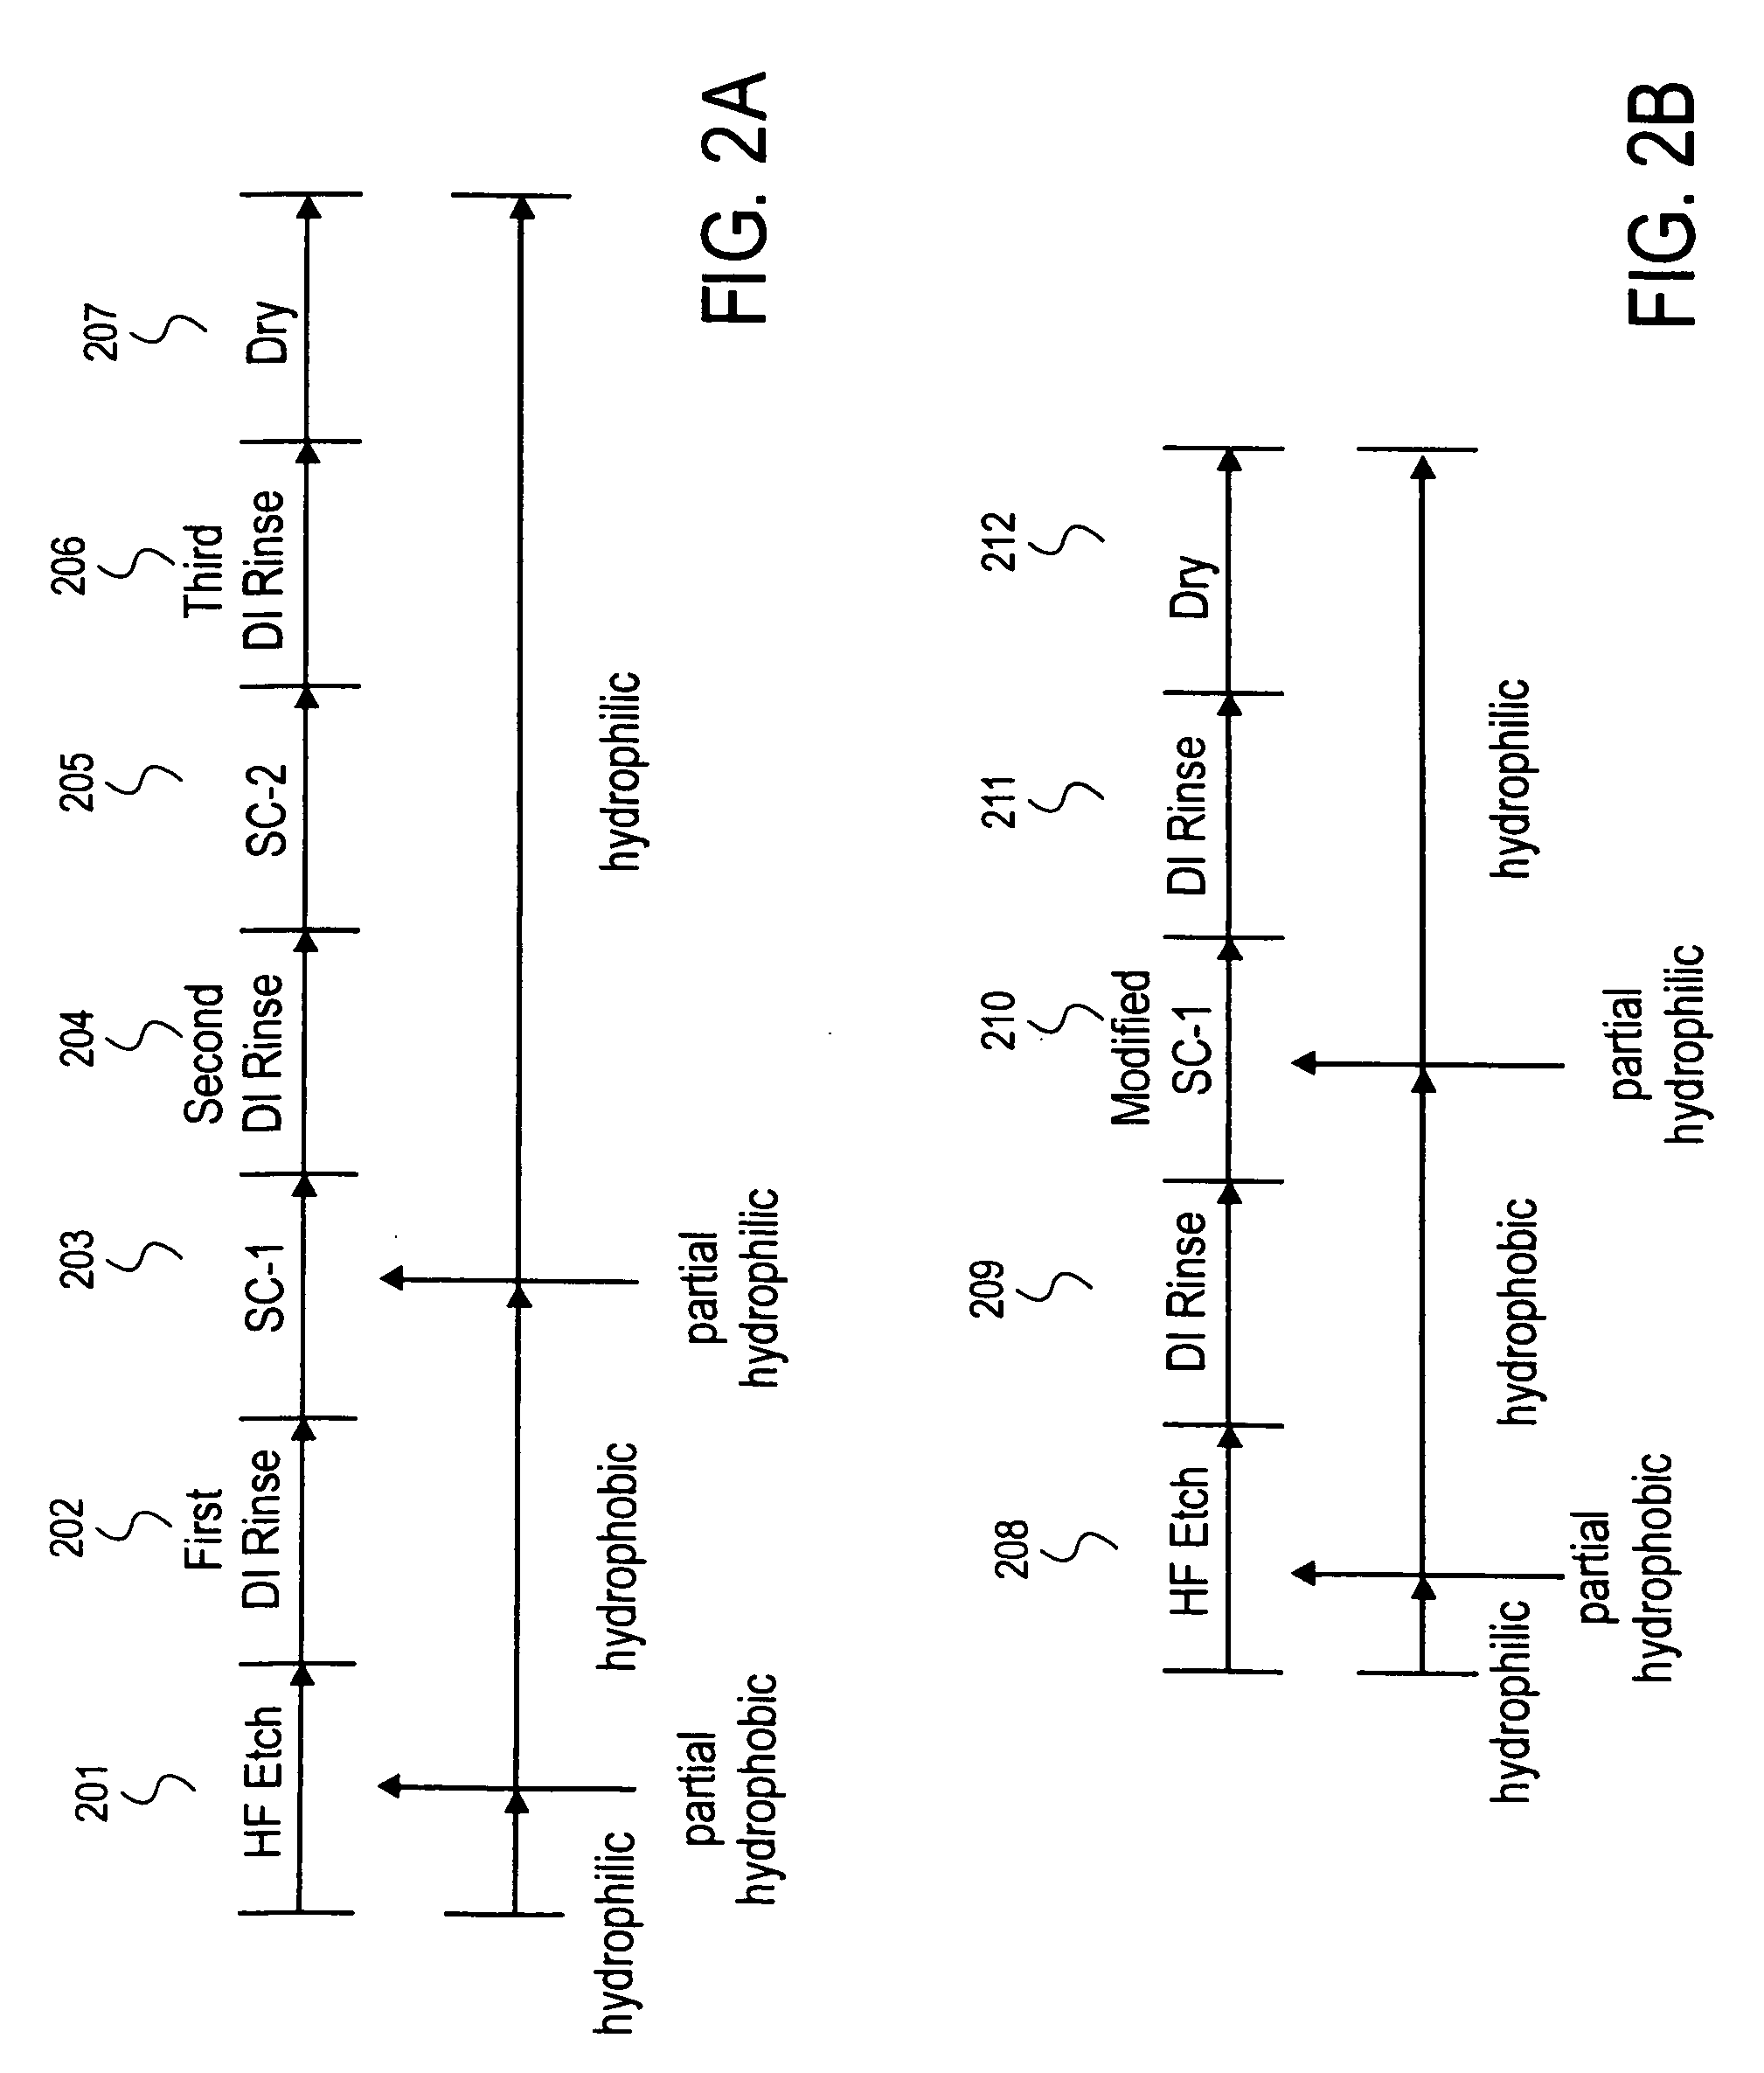 Single wafer cleaning method to reduce particle defects on a wafer surface